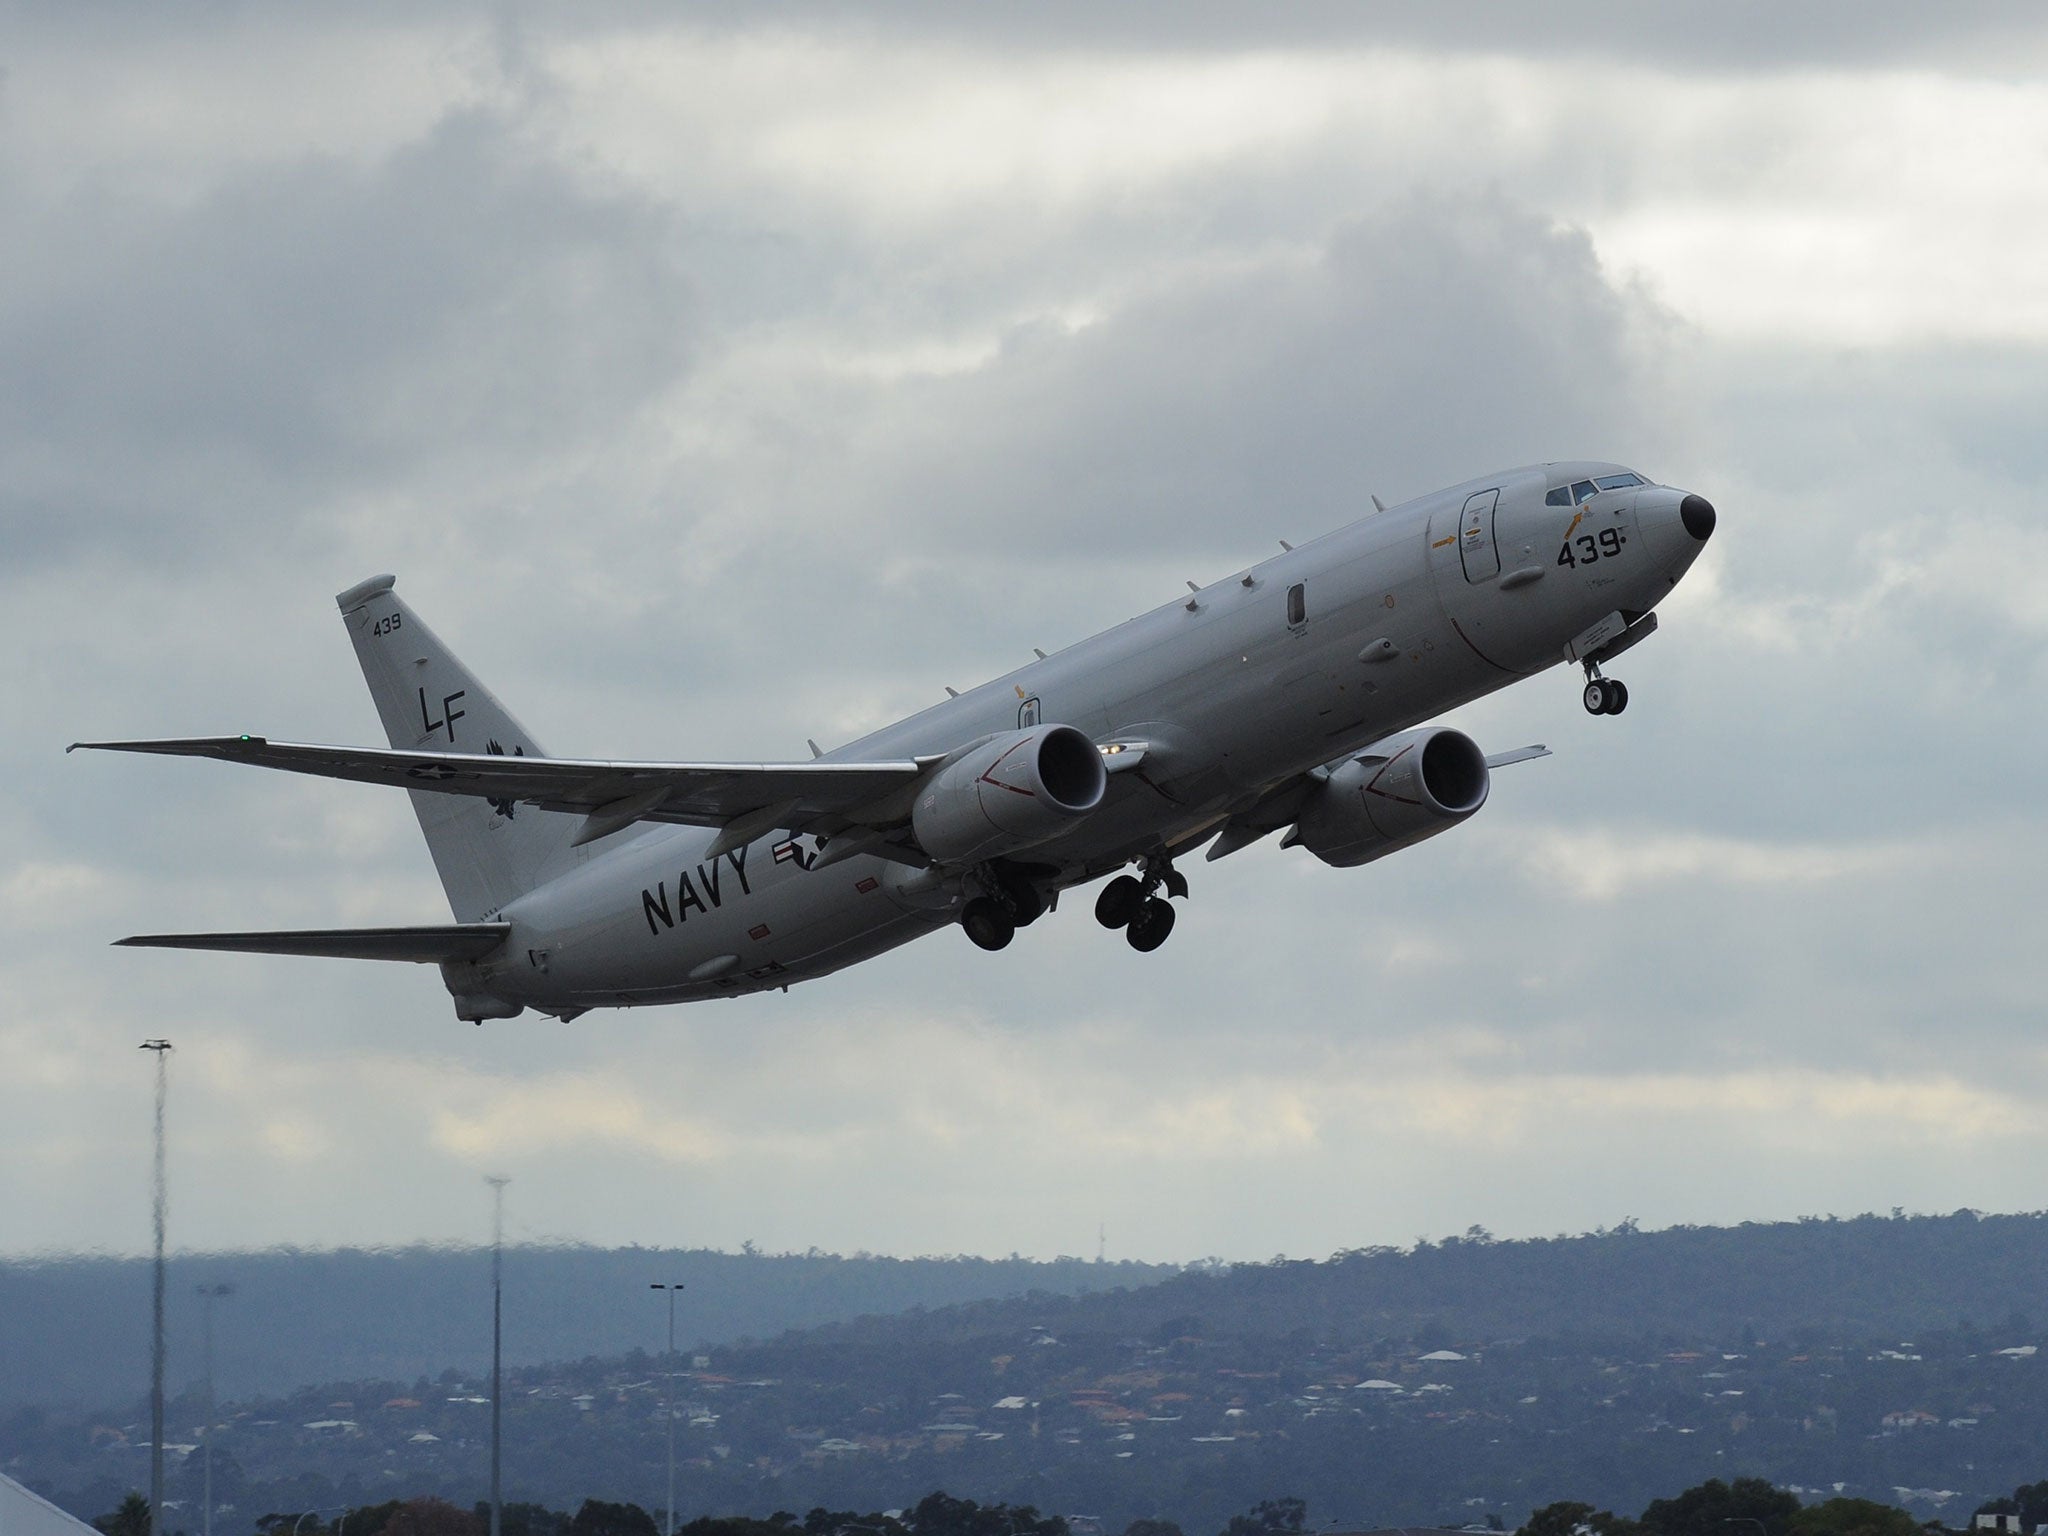 Until new Poseidon P-8 aircraft arrive in 2020 the UK will have none of its own maritime patrol aircraft